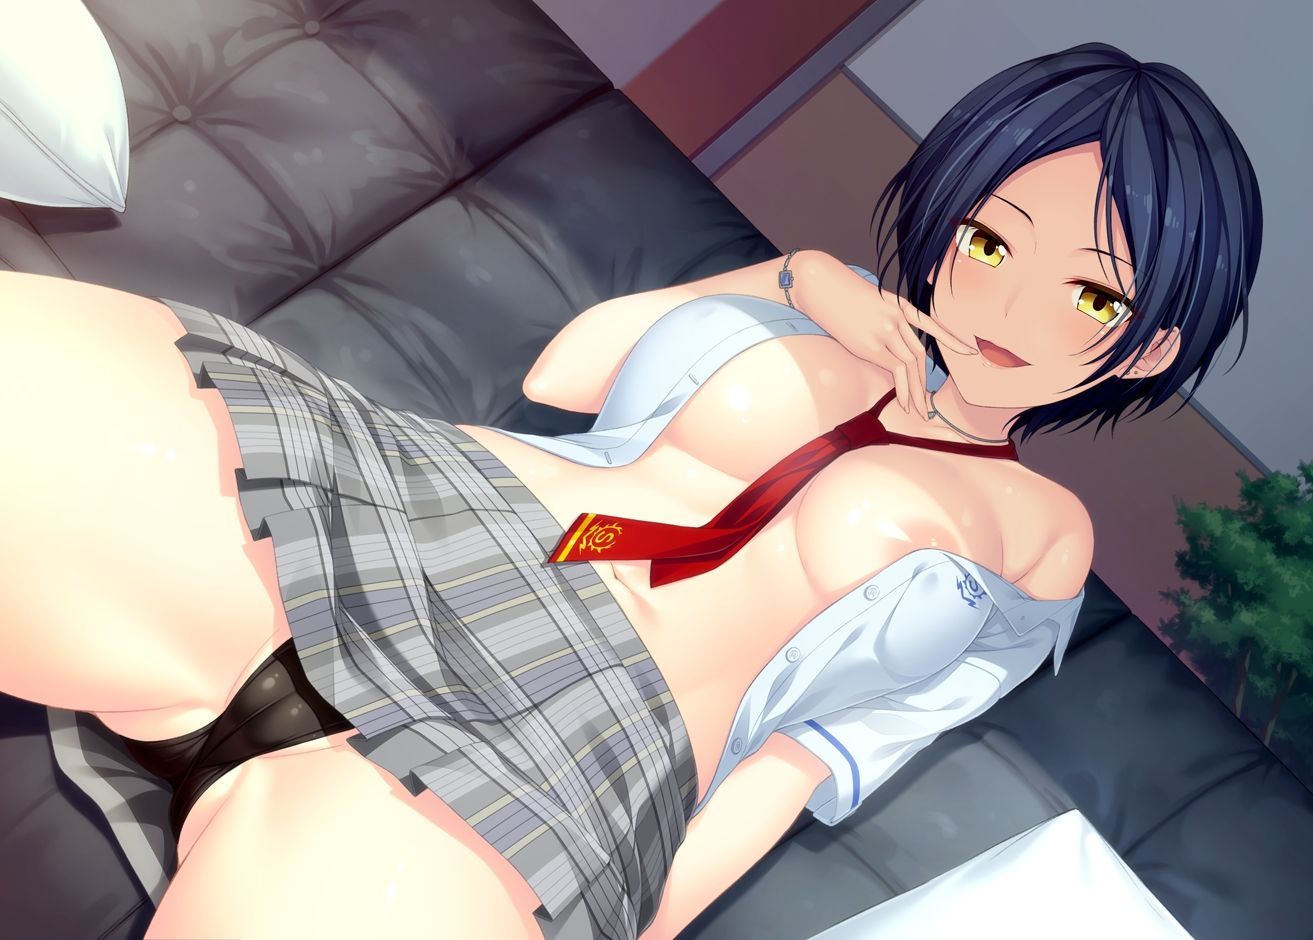 [Secondary erotic] image of a girl wearing a uniform who wants to etch as it is [36 pieces] 3